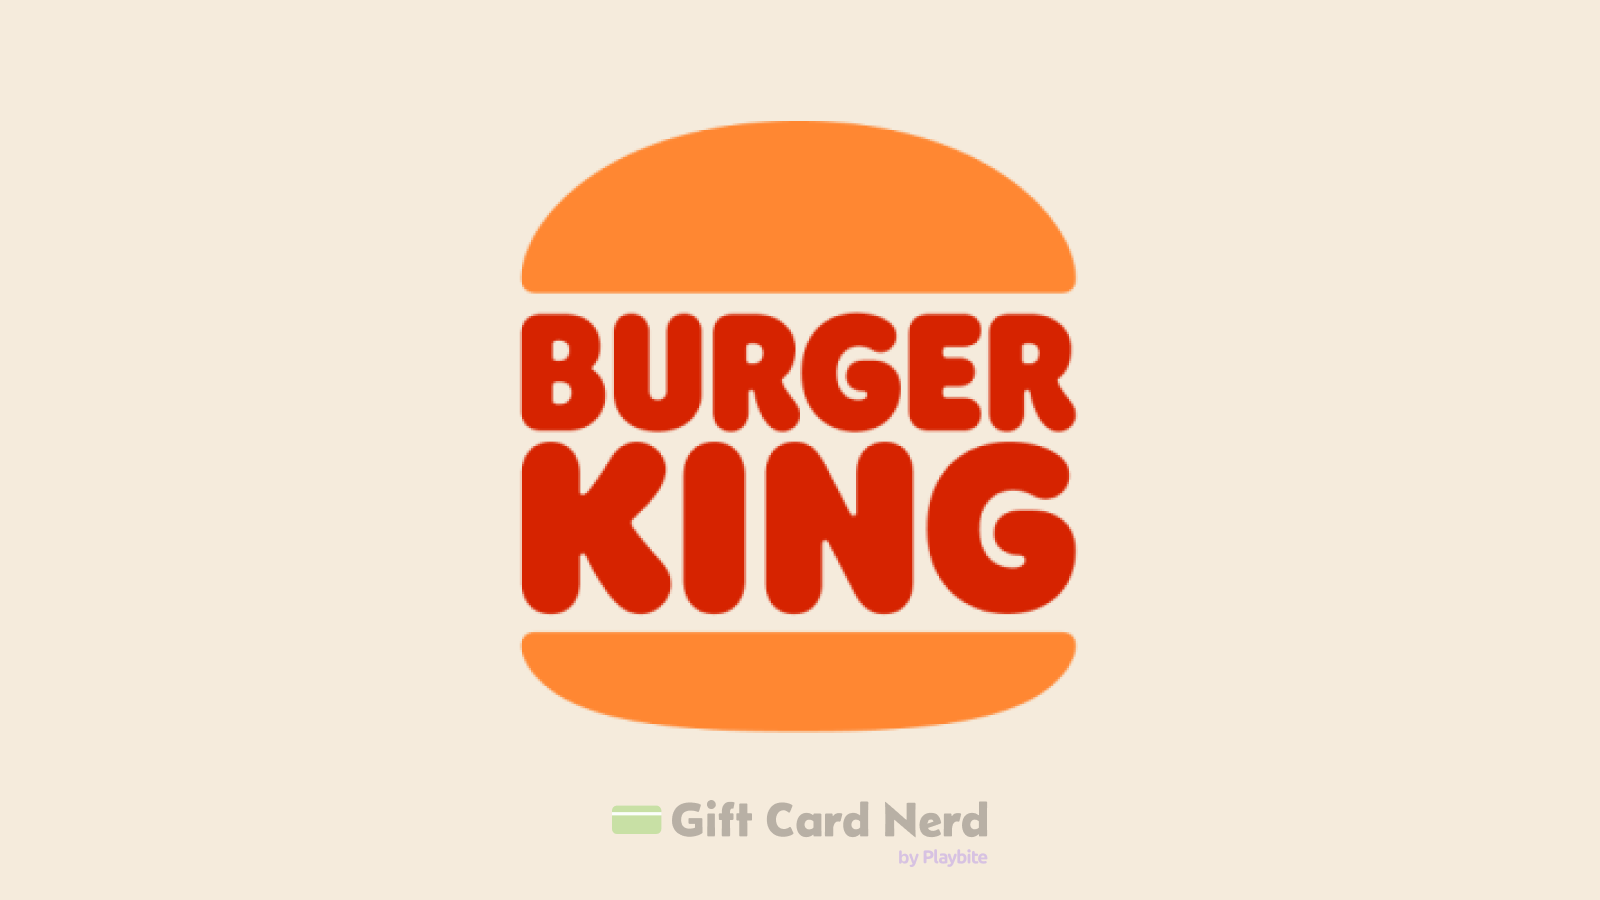 Does Target sell Burger King gift cards?